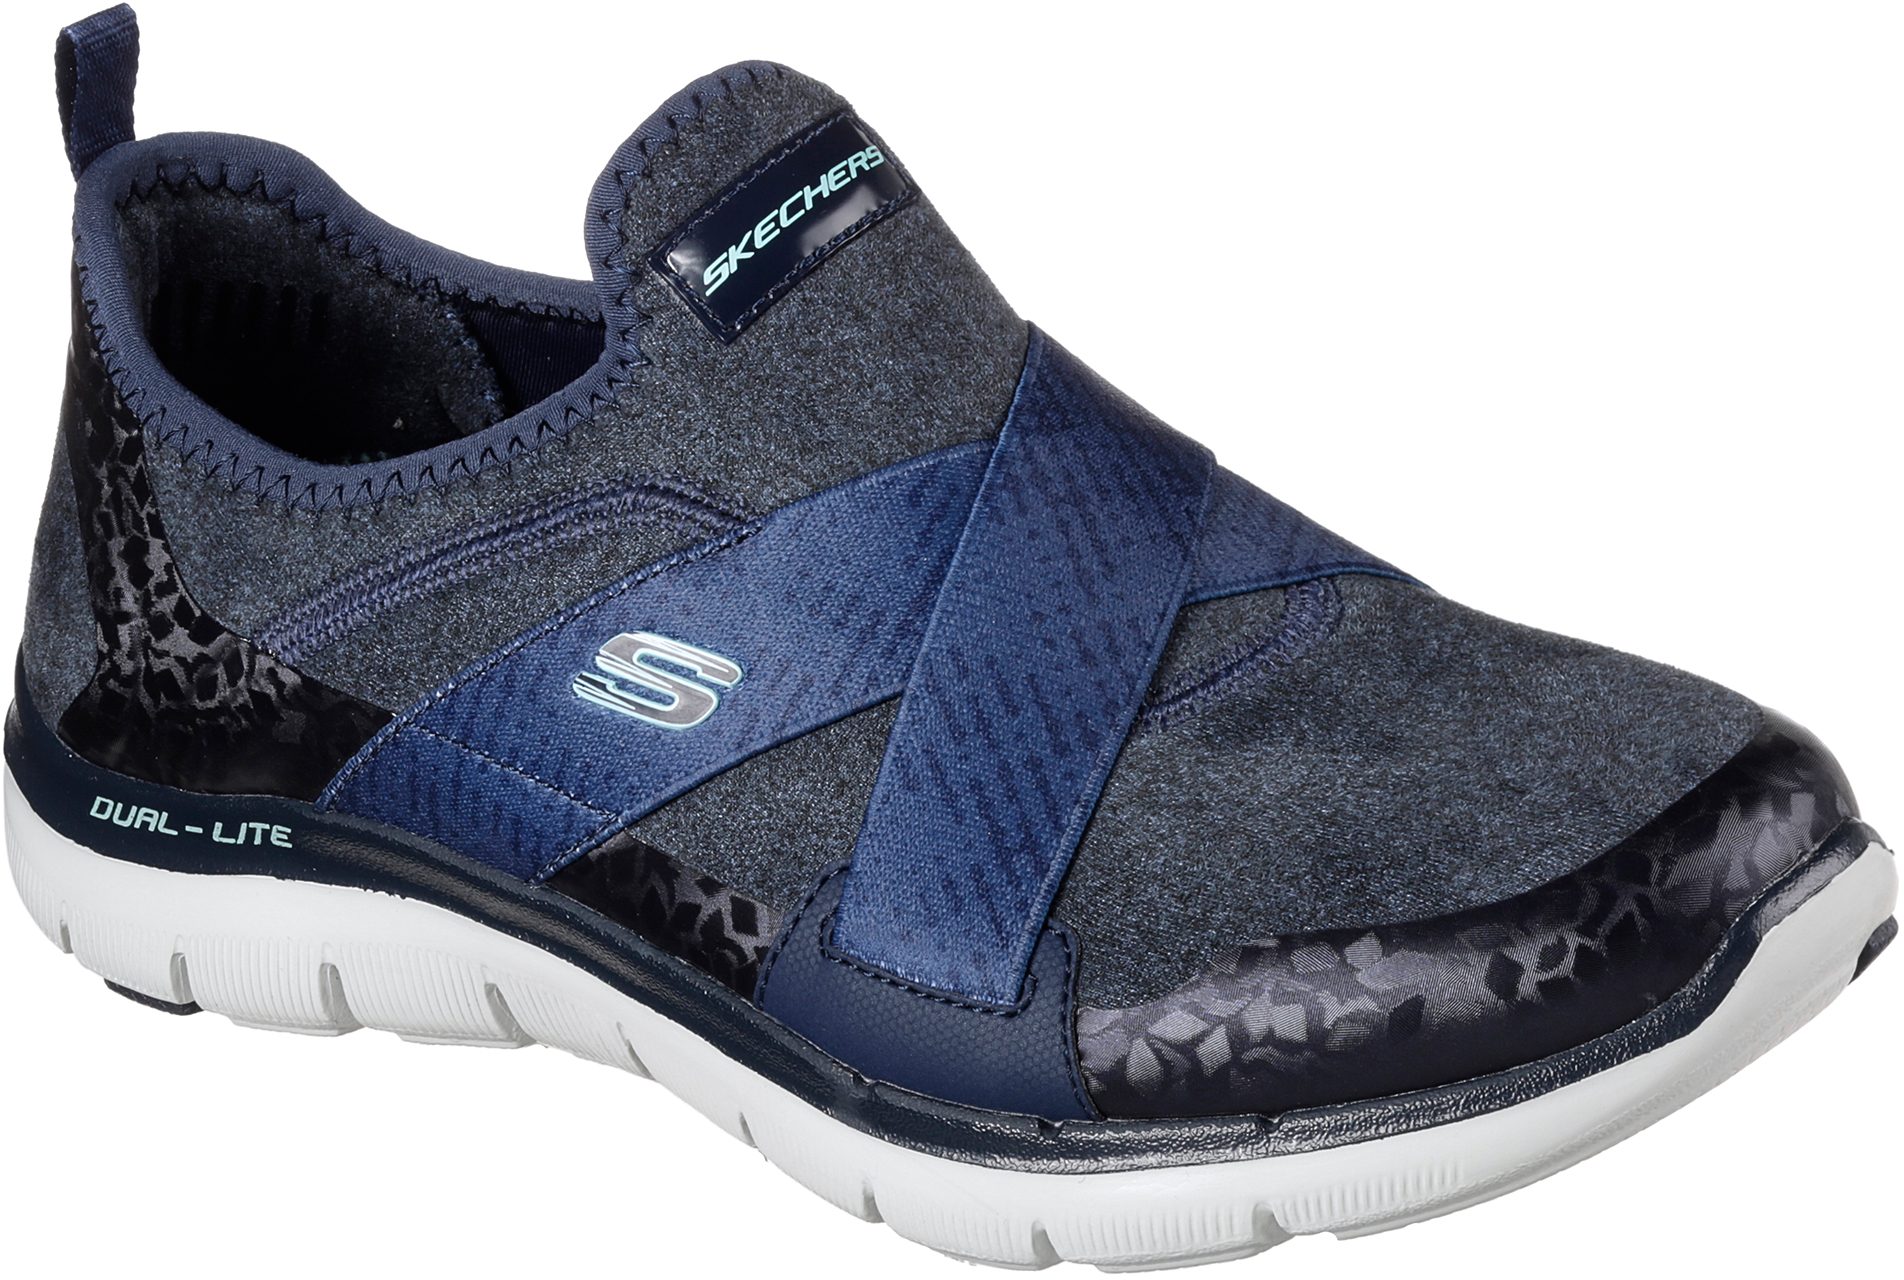 Plantando árboles amante Nominal Skechers Flex Appeal 2.0 - Bright Eyed Navy 12619 NVY - Womens Trainers -  Humphries Shoes